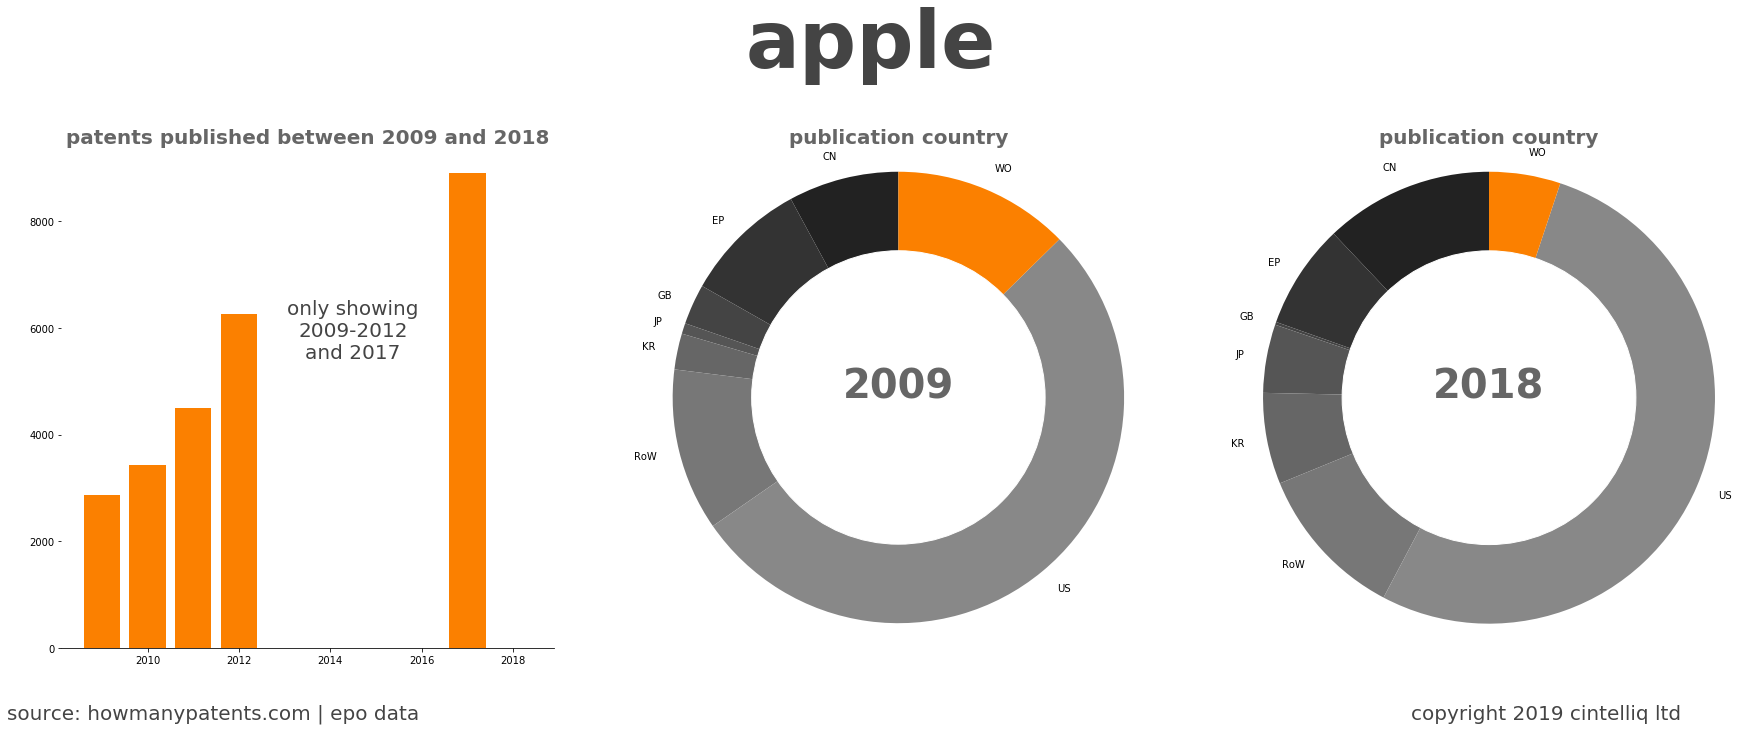 summary of patents for Apple